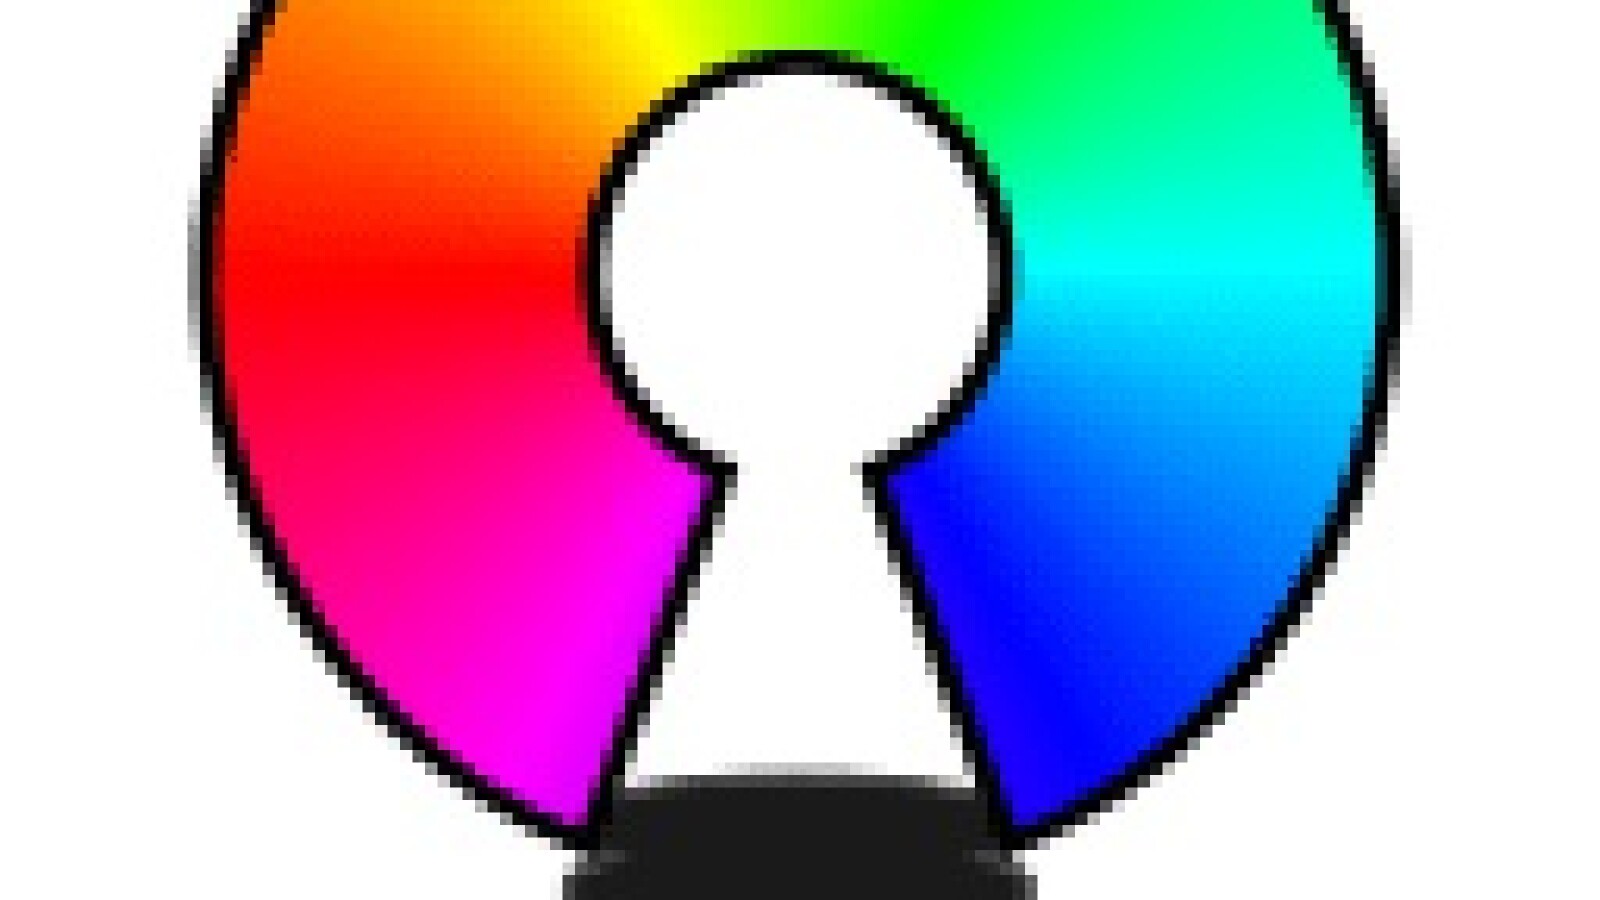 download the last version for mac OpenRGB